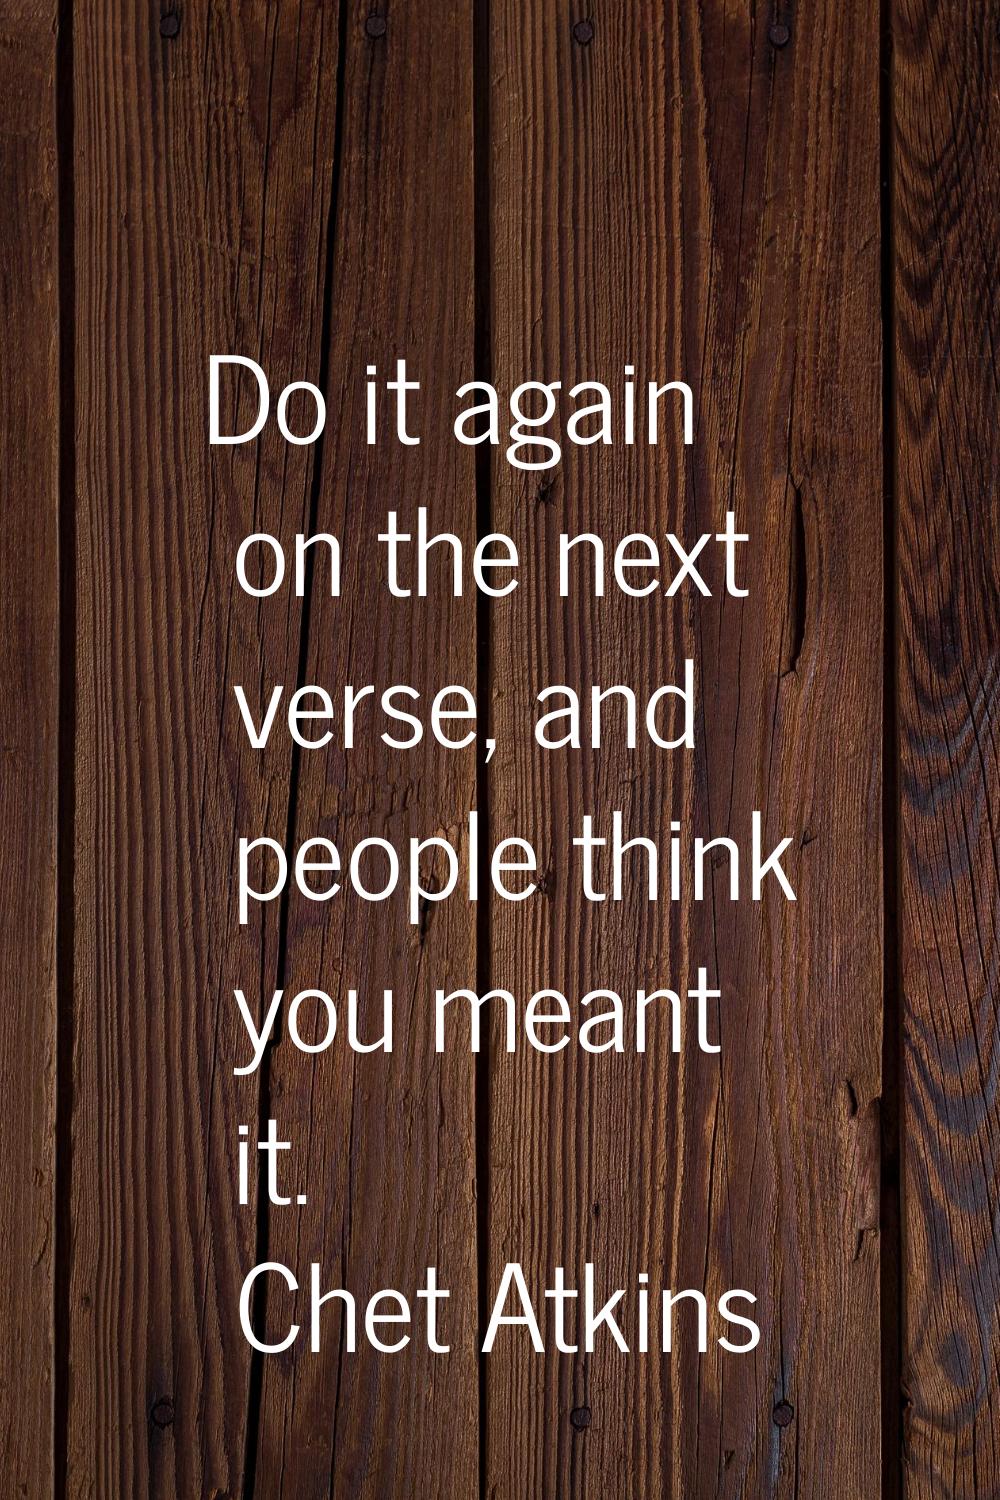 Do it again on the next verse, and people think you meant it.